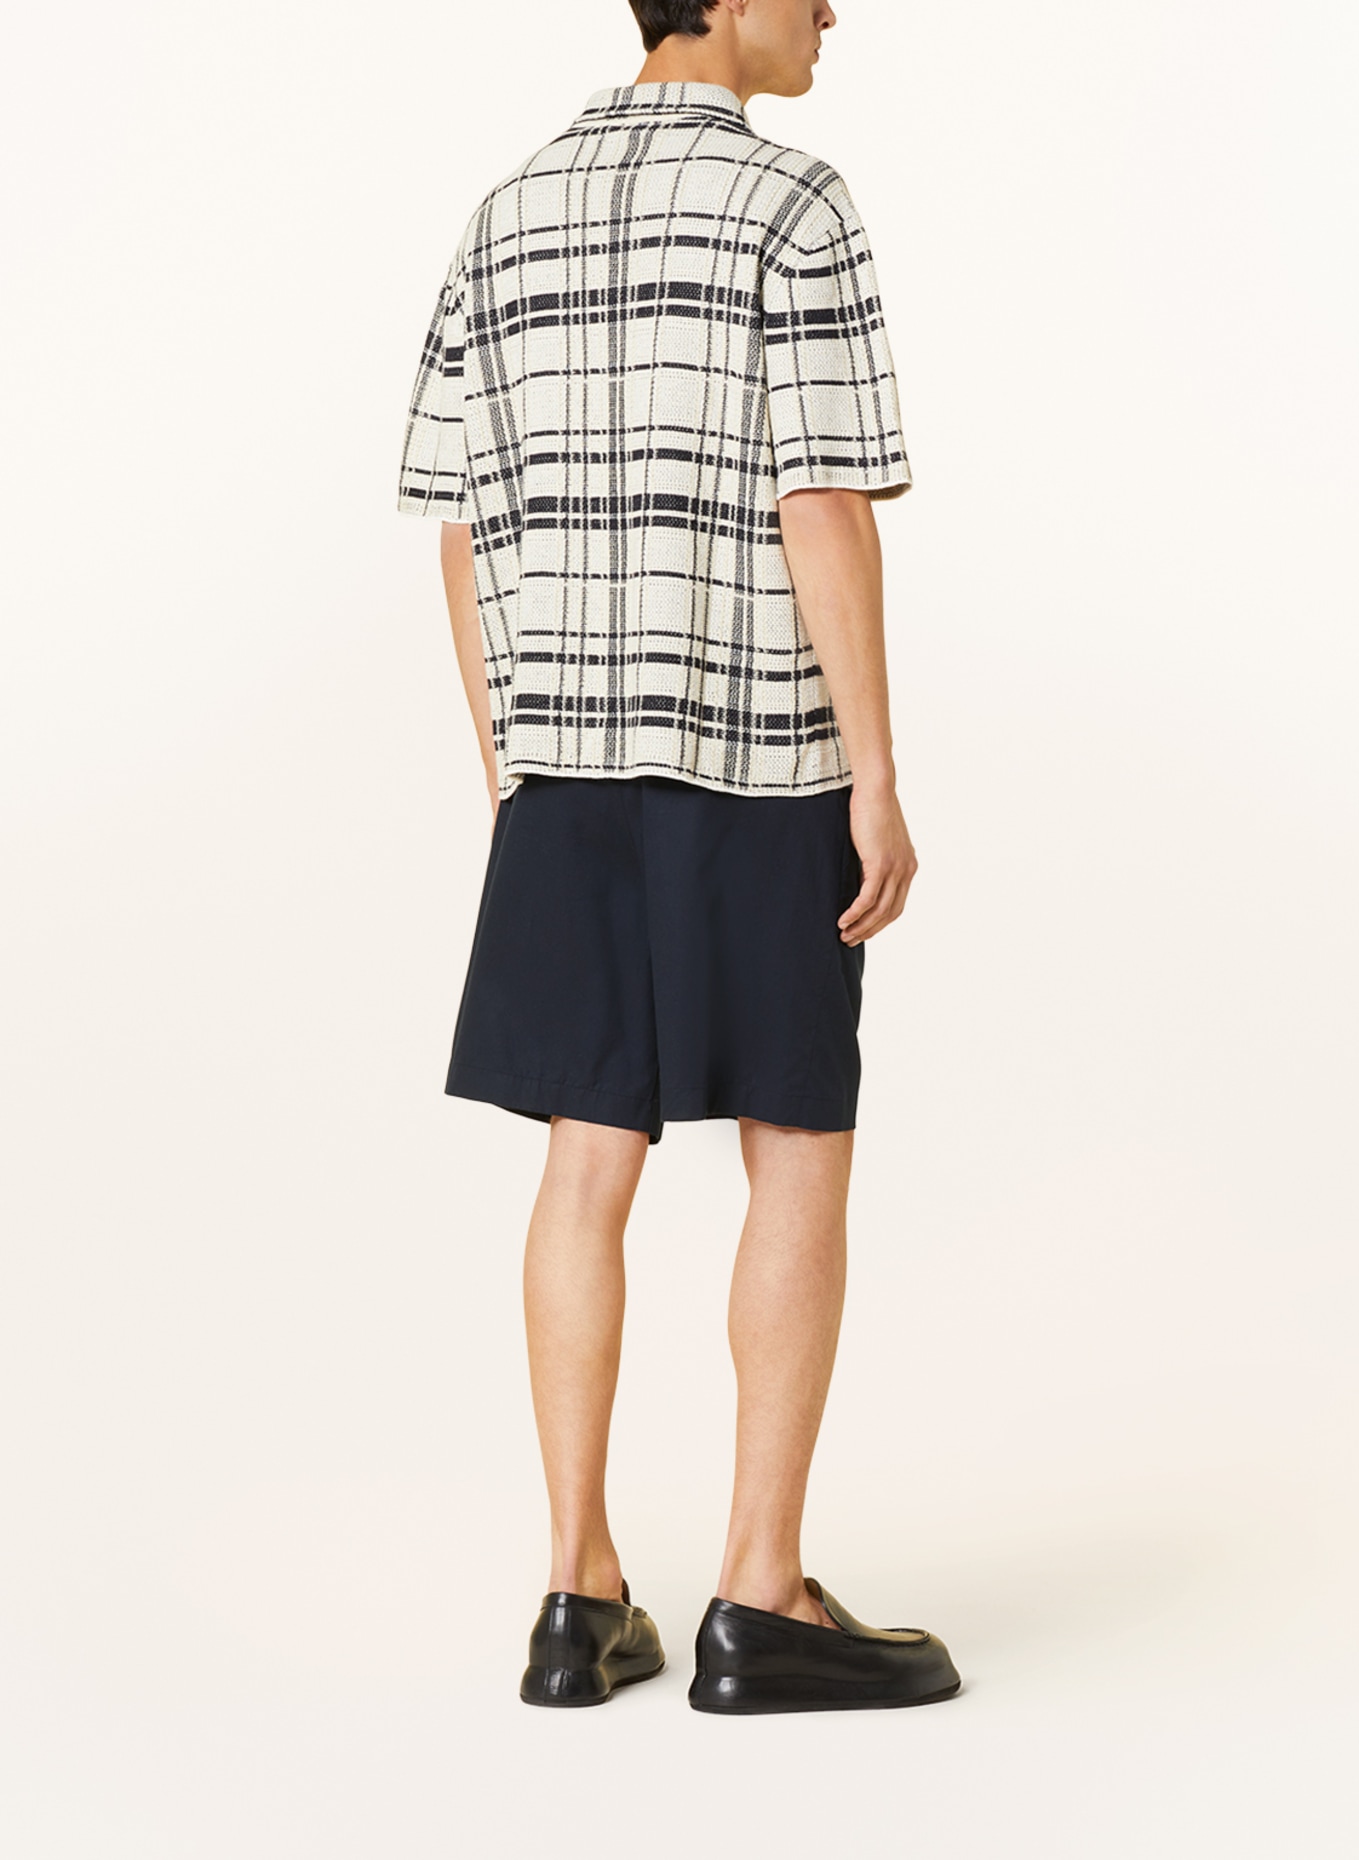 COS Short sleeve shirt relaxed fit, Color: ECRU/ BLACK (Image 3)